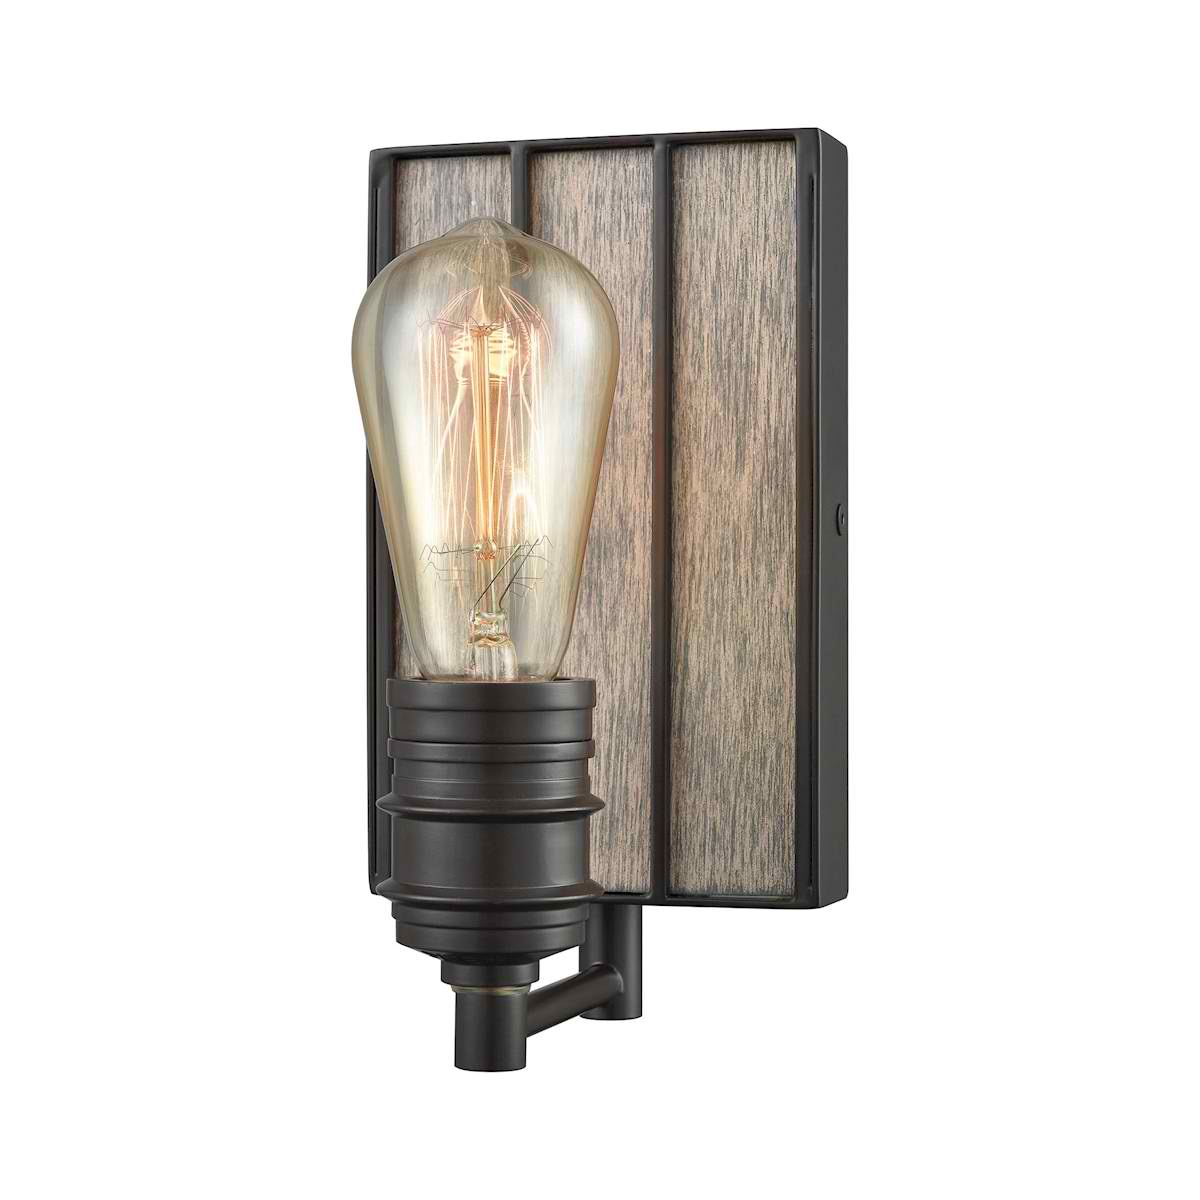 Brookweiler 1 Light Vanity in Oil Rubbed Bronze with Washed Wood Backplate